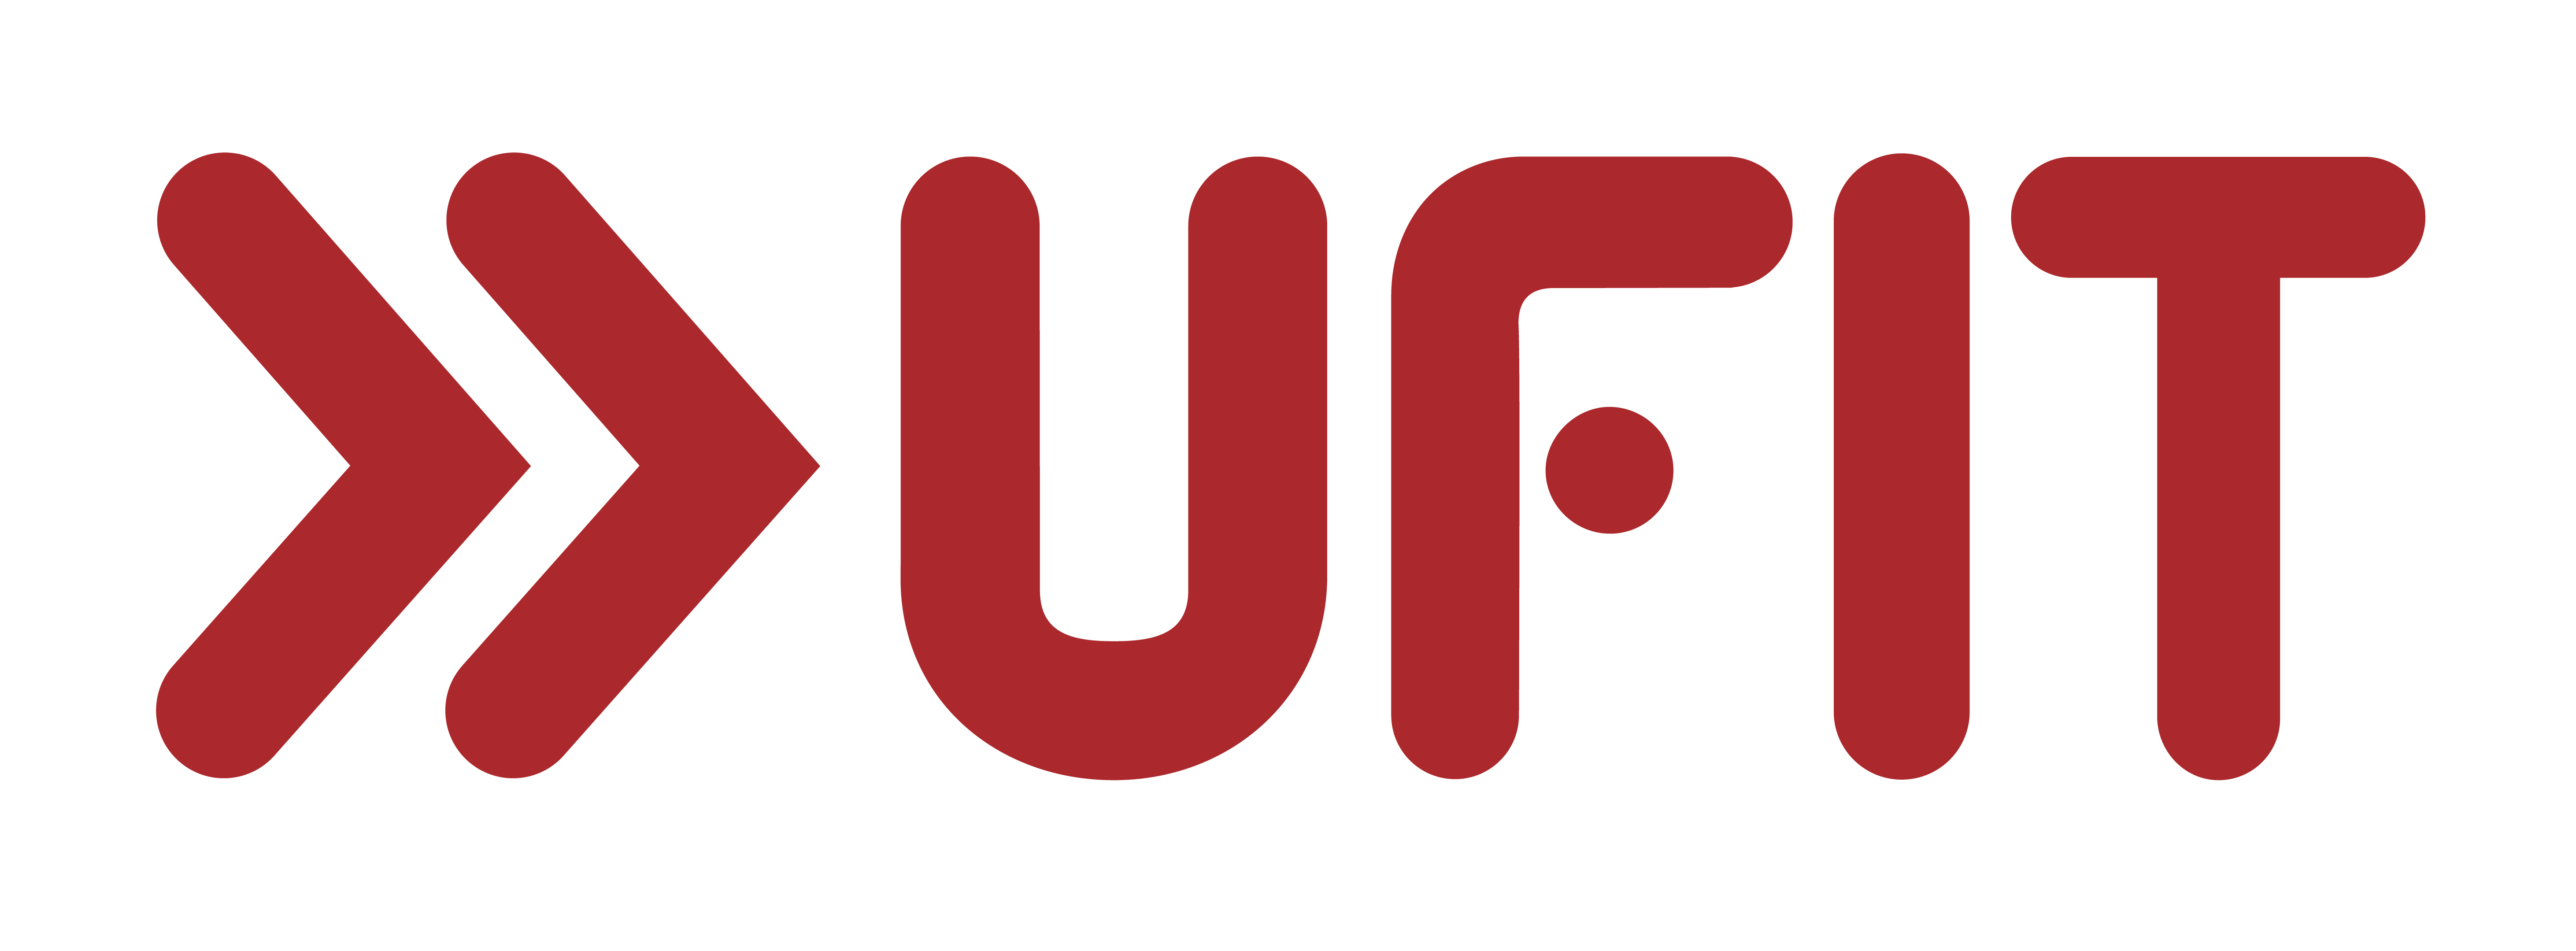 THE UFIT WAY: UFIT Health and Fitness Celebrates A Decade with New Rebrand, Digital Transformation and UFIT Hubs